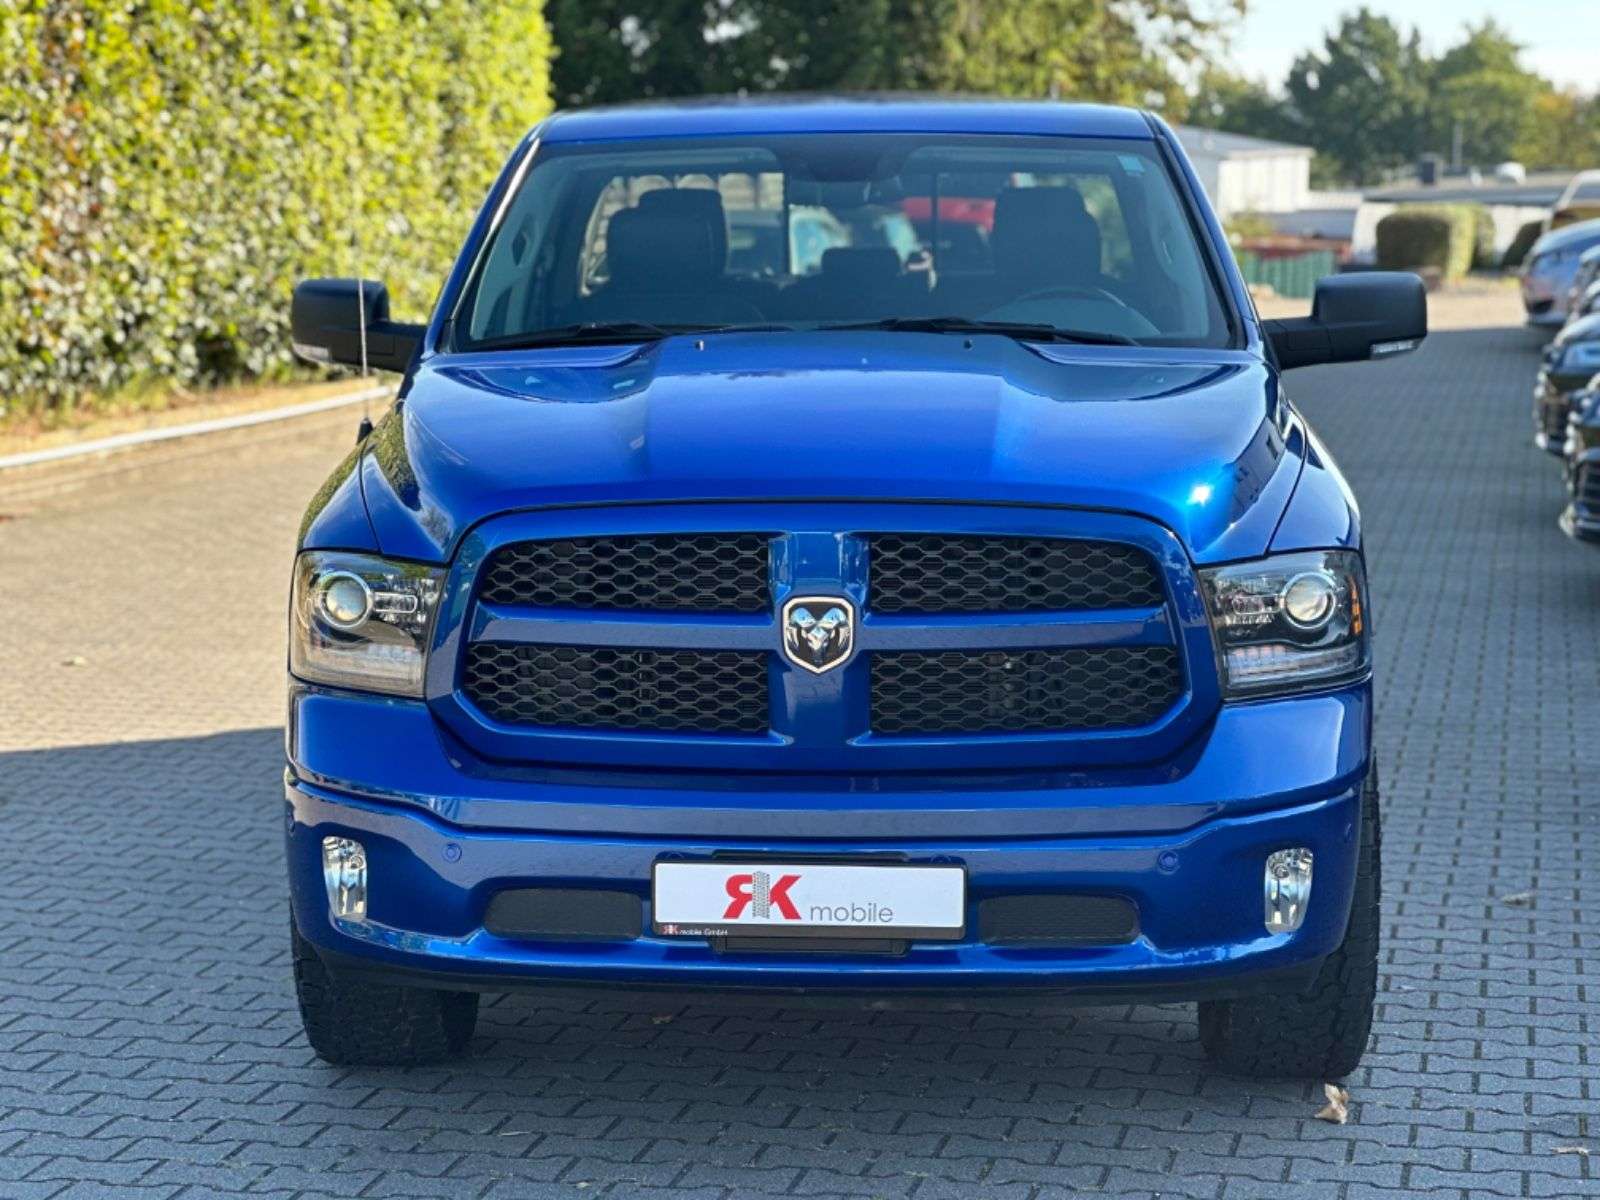 Dodge RAM Off-Road/Pick-up in Blue used in Syke for € 38,200.-